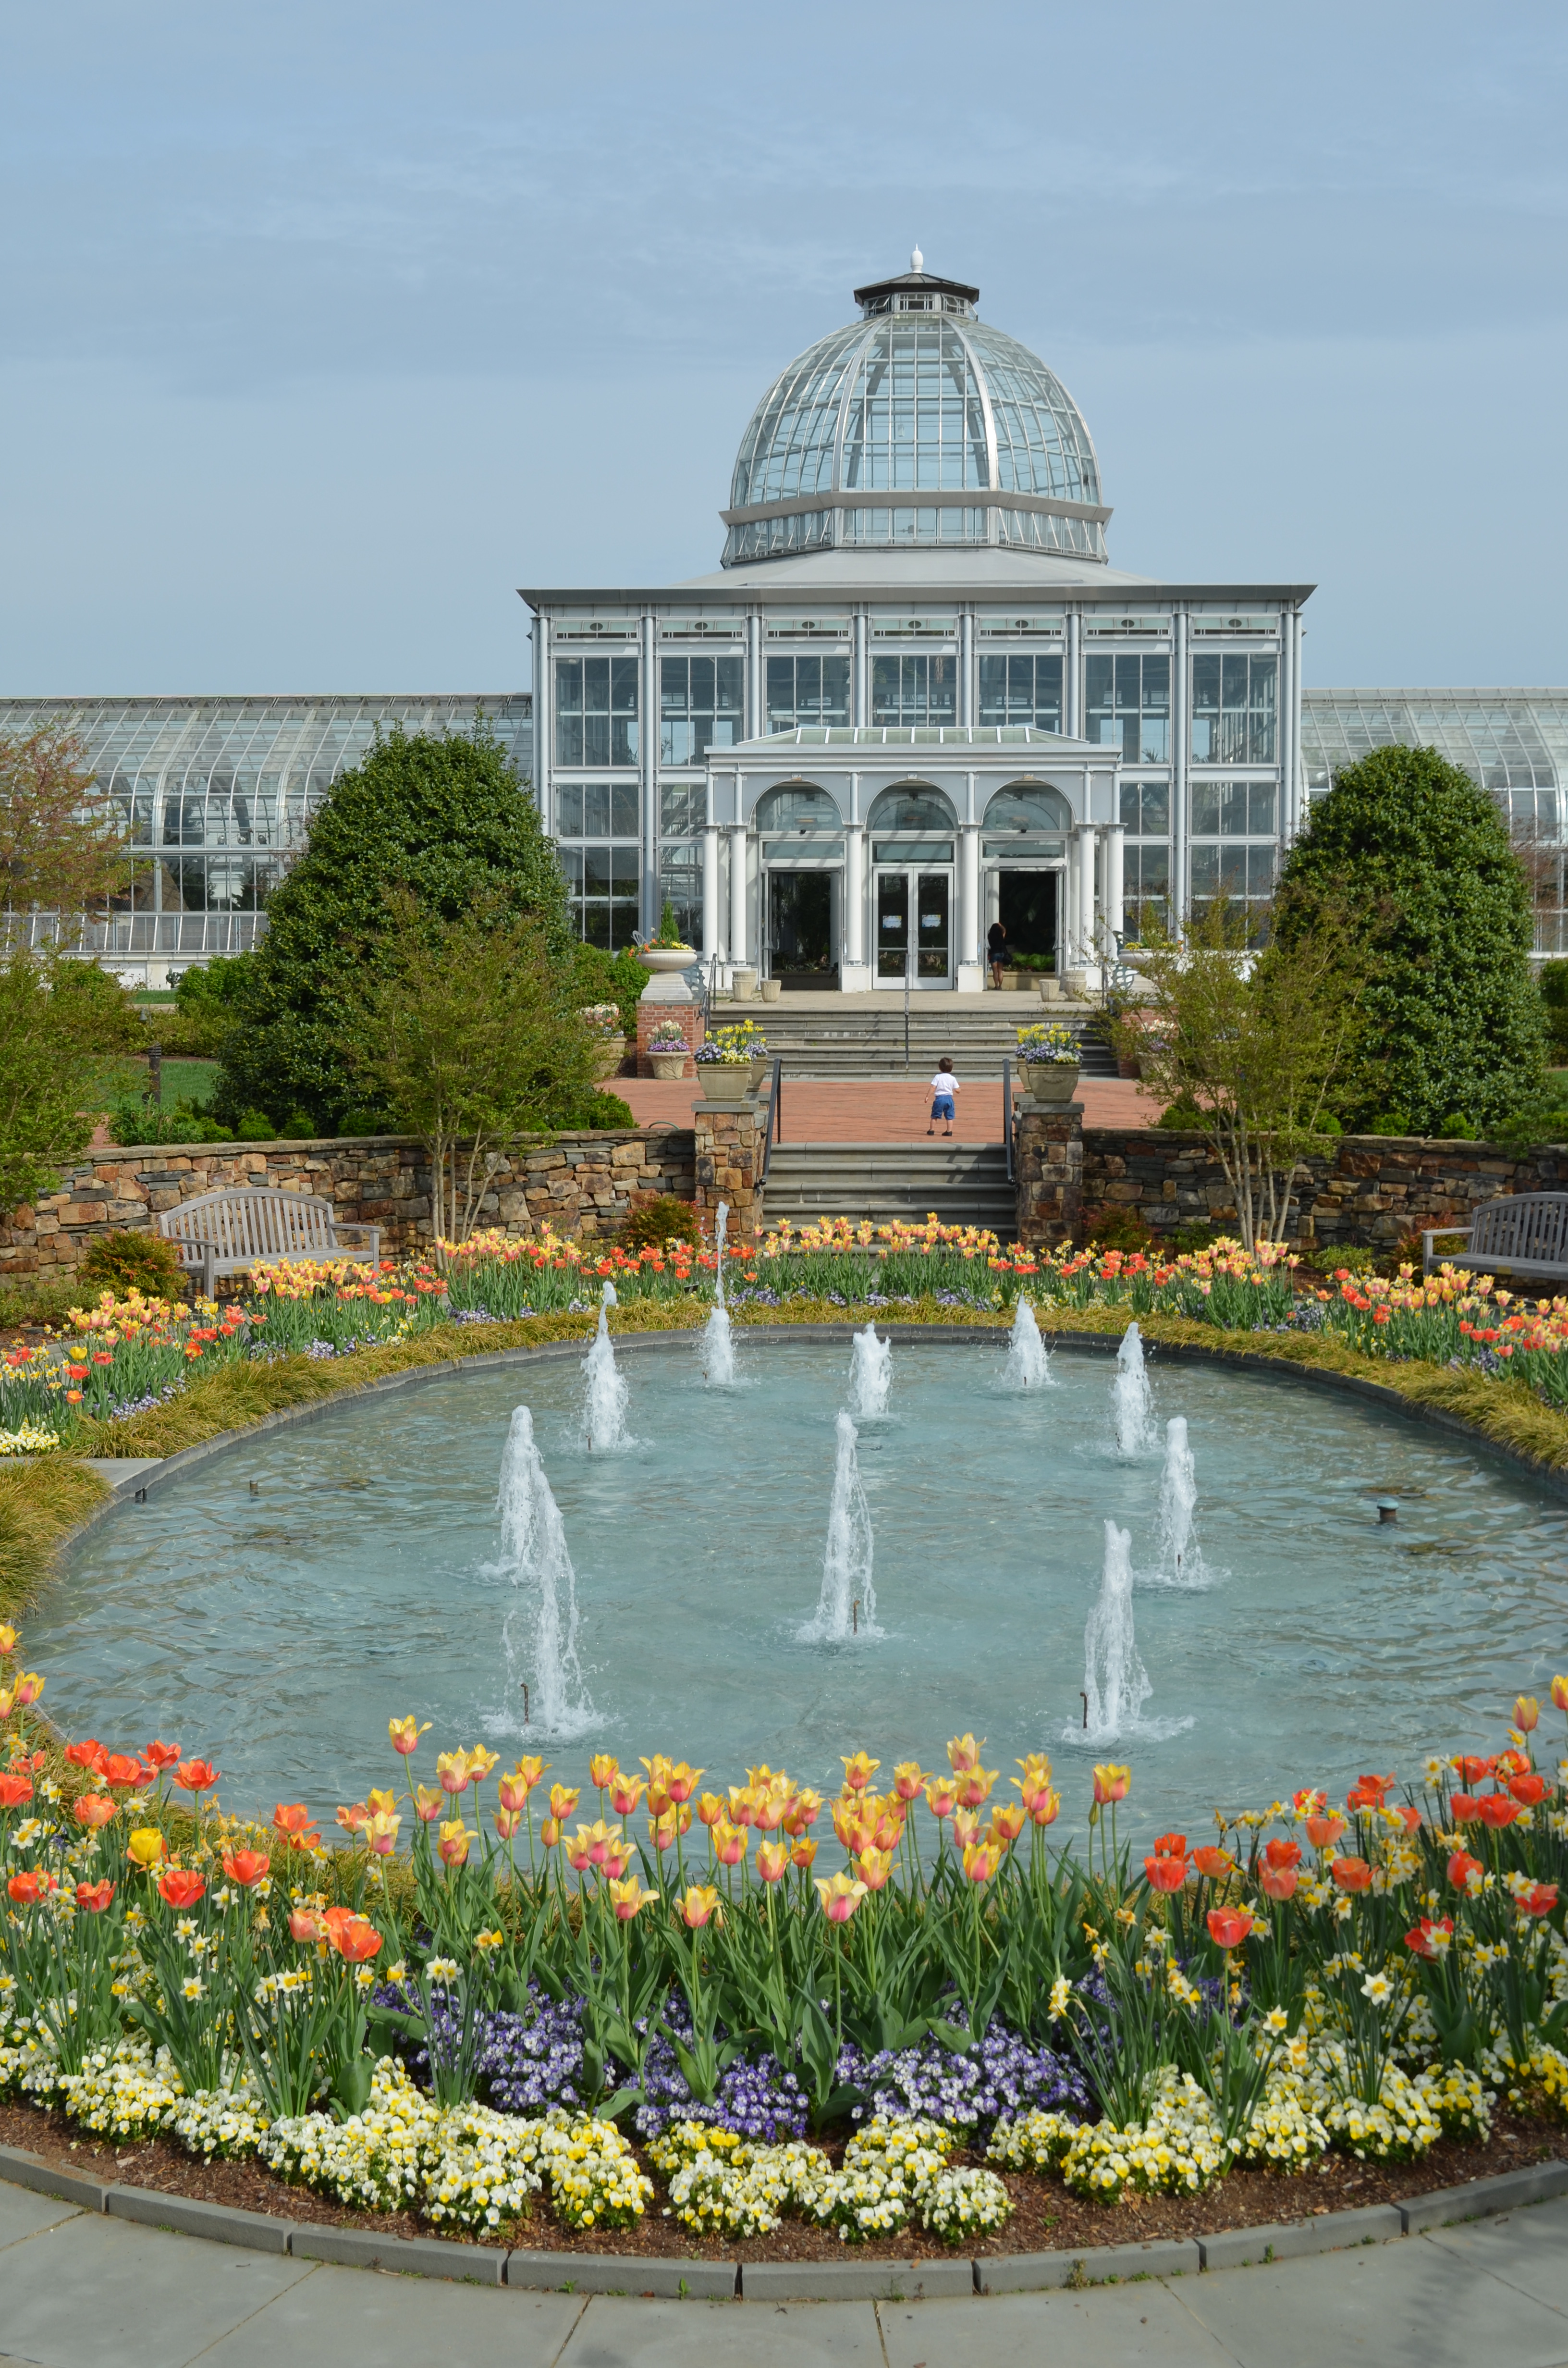 Lewis Ginter Botanical Garden - One of America's Most Beautiful ...